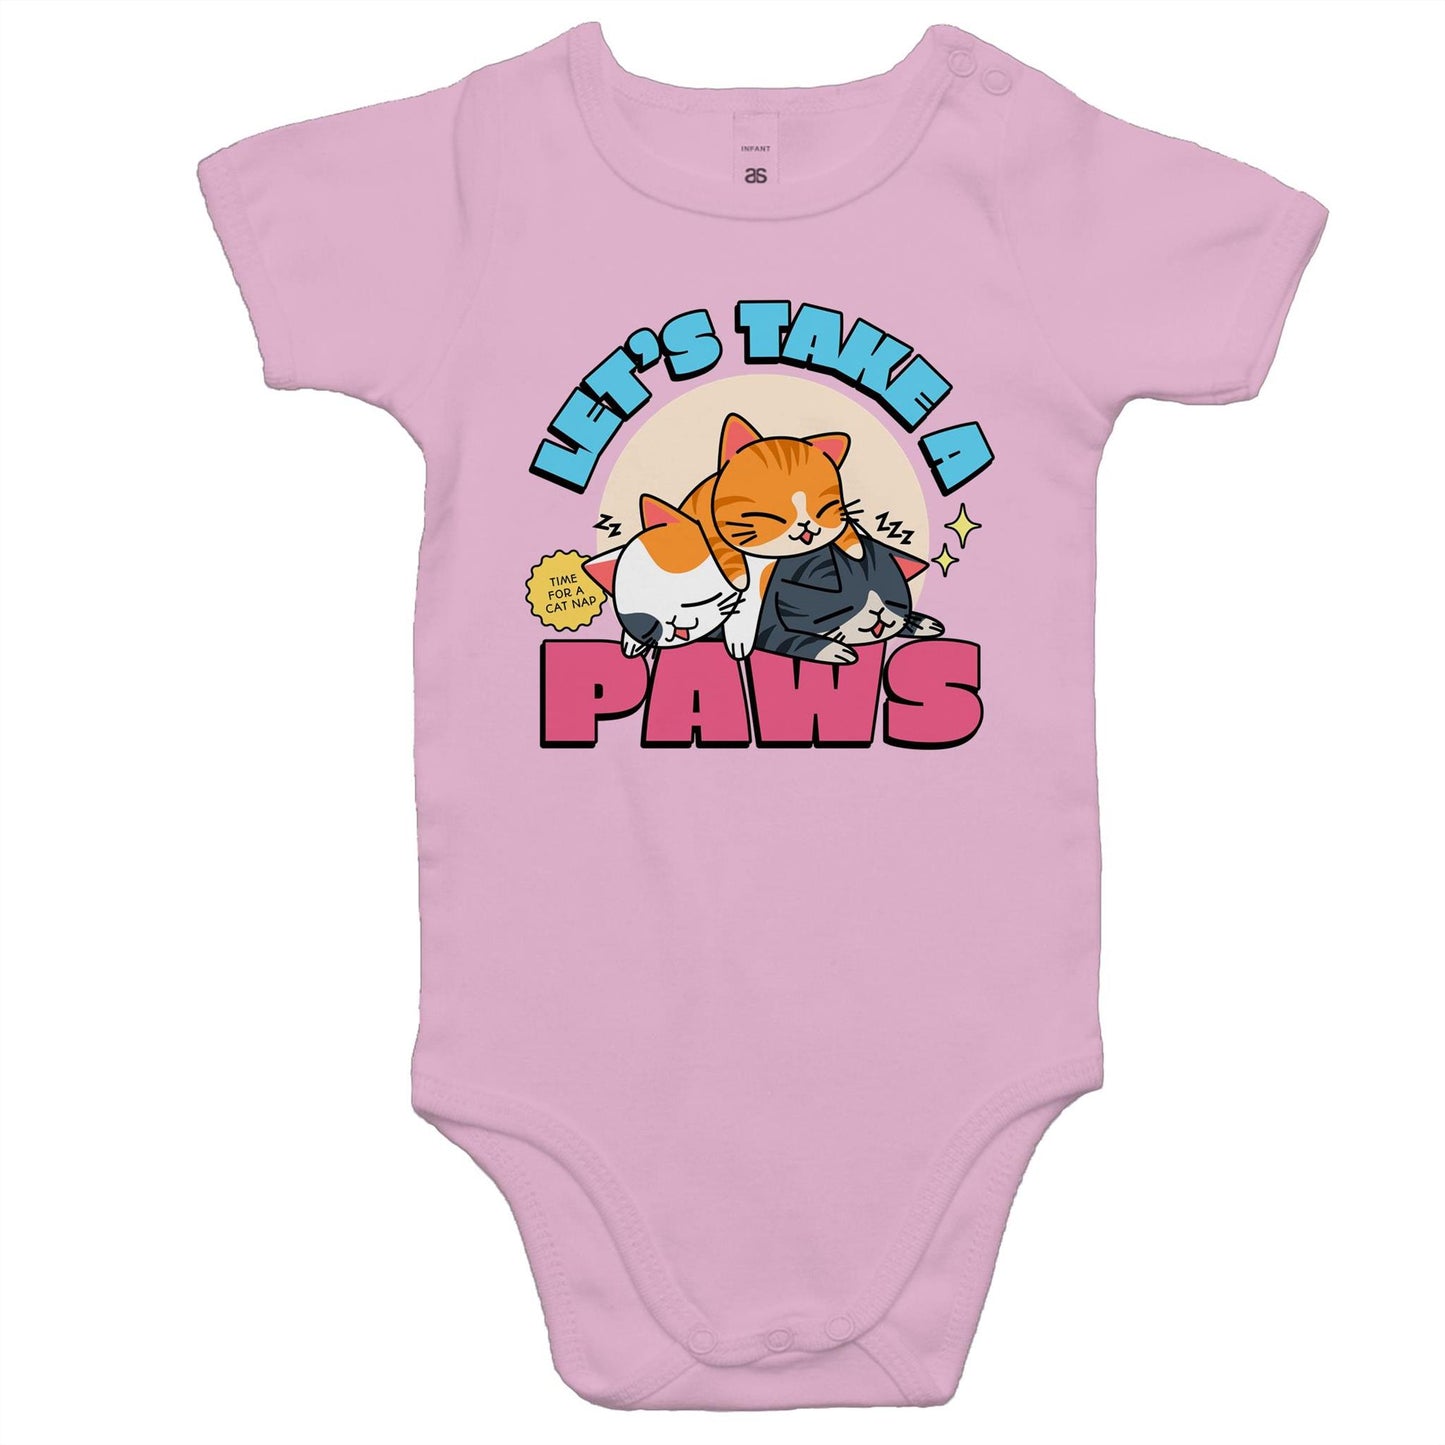 Let's Take A Paws, Time For A Cat Nap - Baby Bodysuit Pink Baby Bodysuit animal